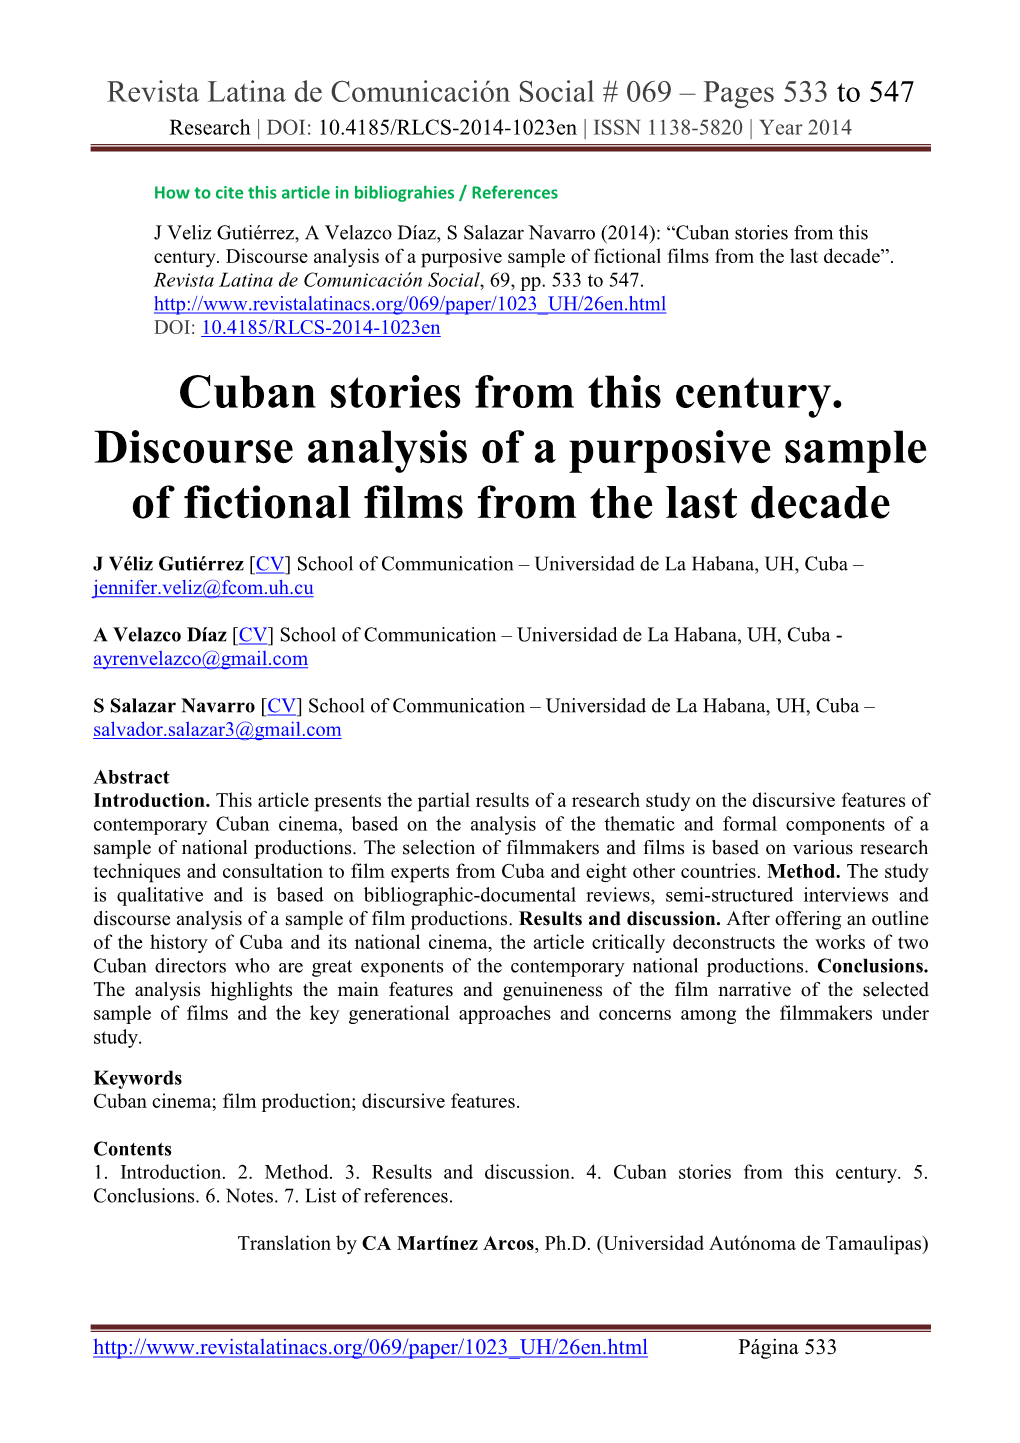 Cuban Stories from This Century. Discourse Analysis of a Purposive Sample of Fictional Films from the Last Decade”